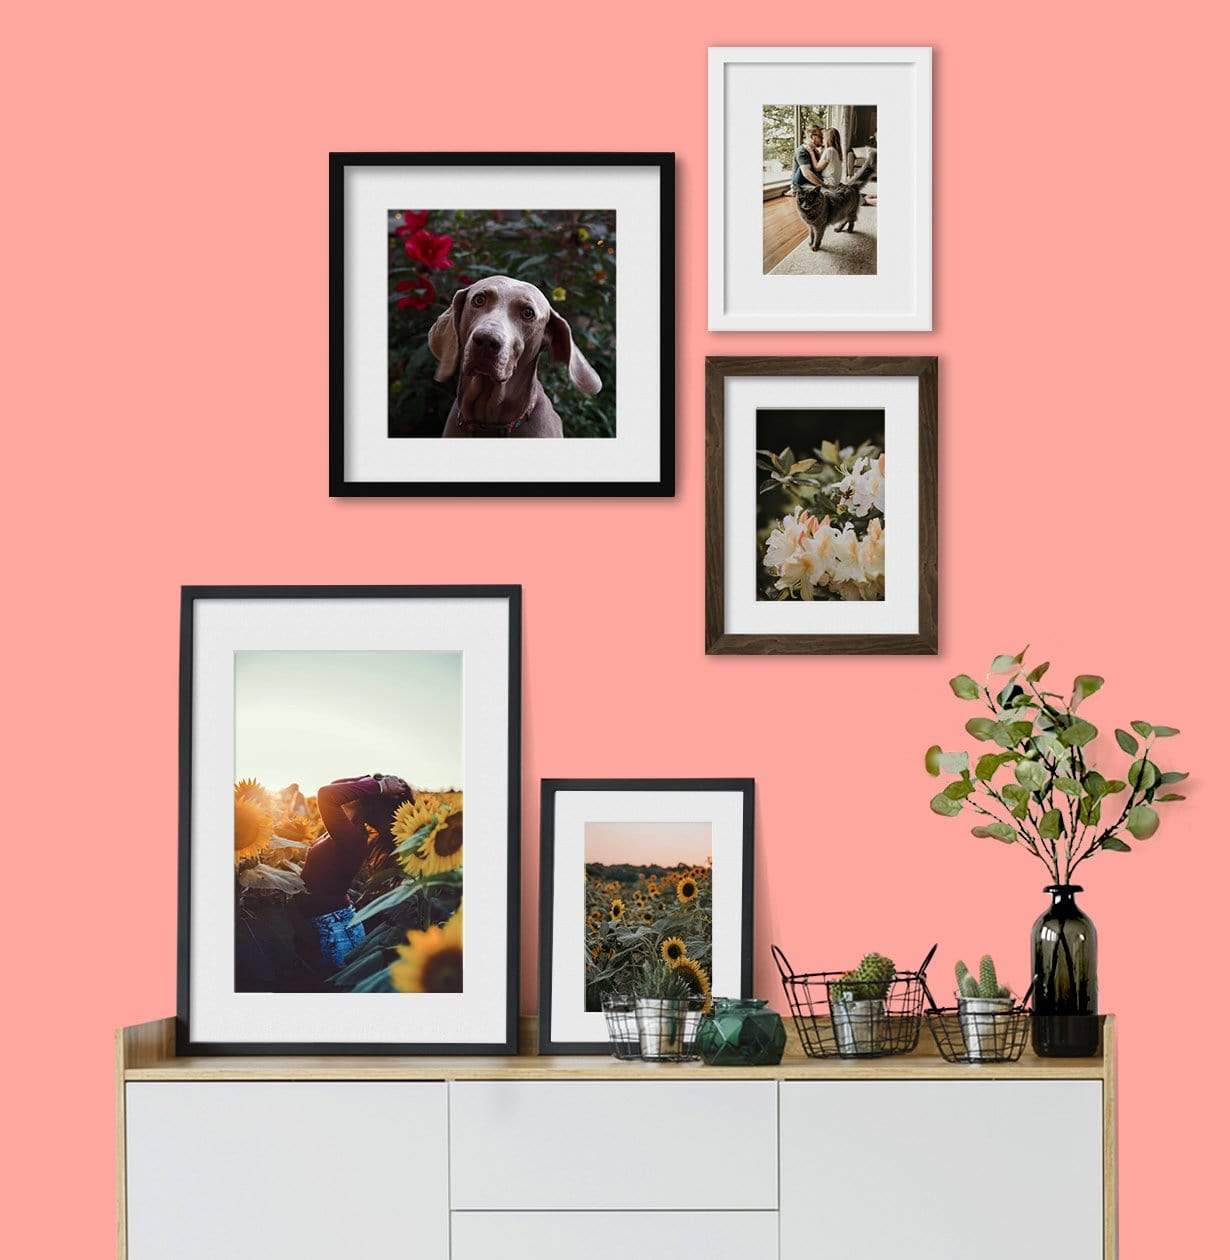 Custom Framed Photo Prints - Made in Canada by Posterjack